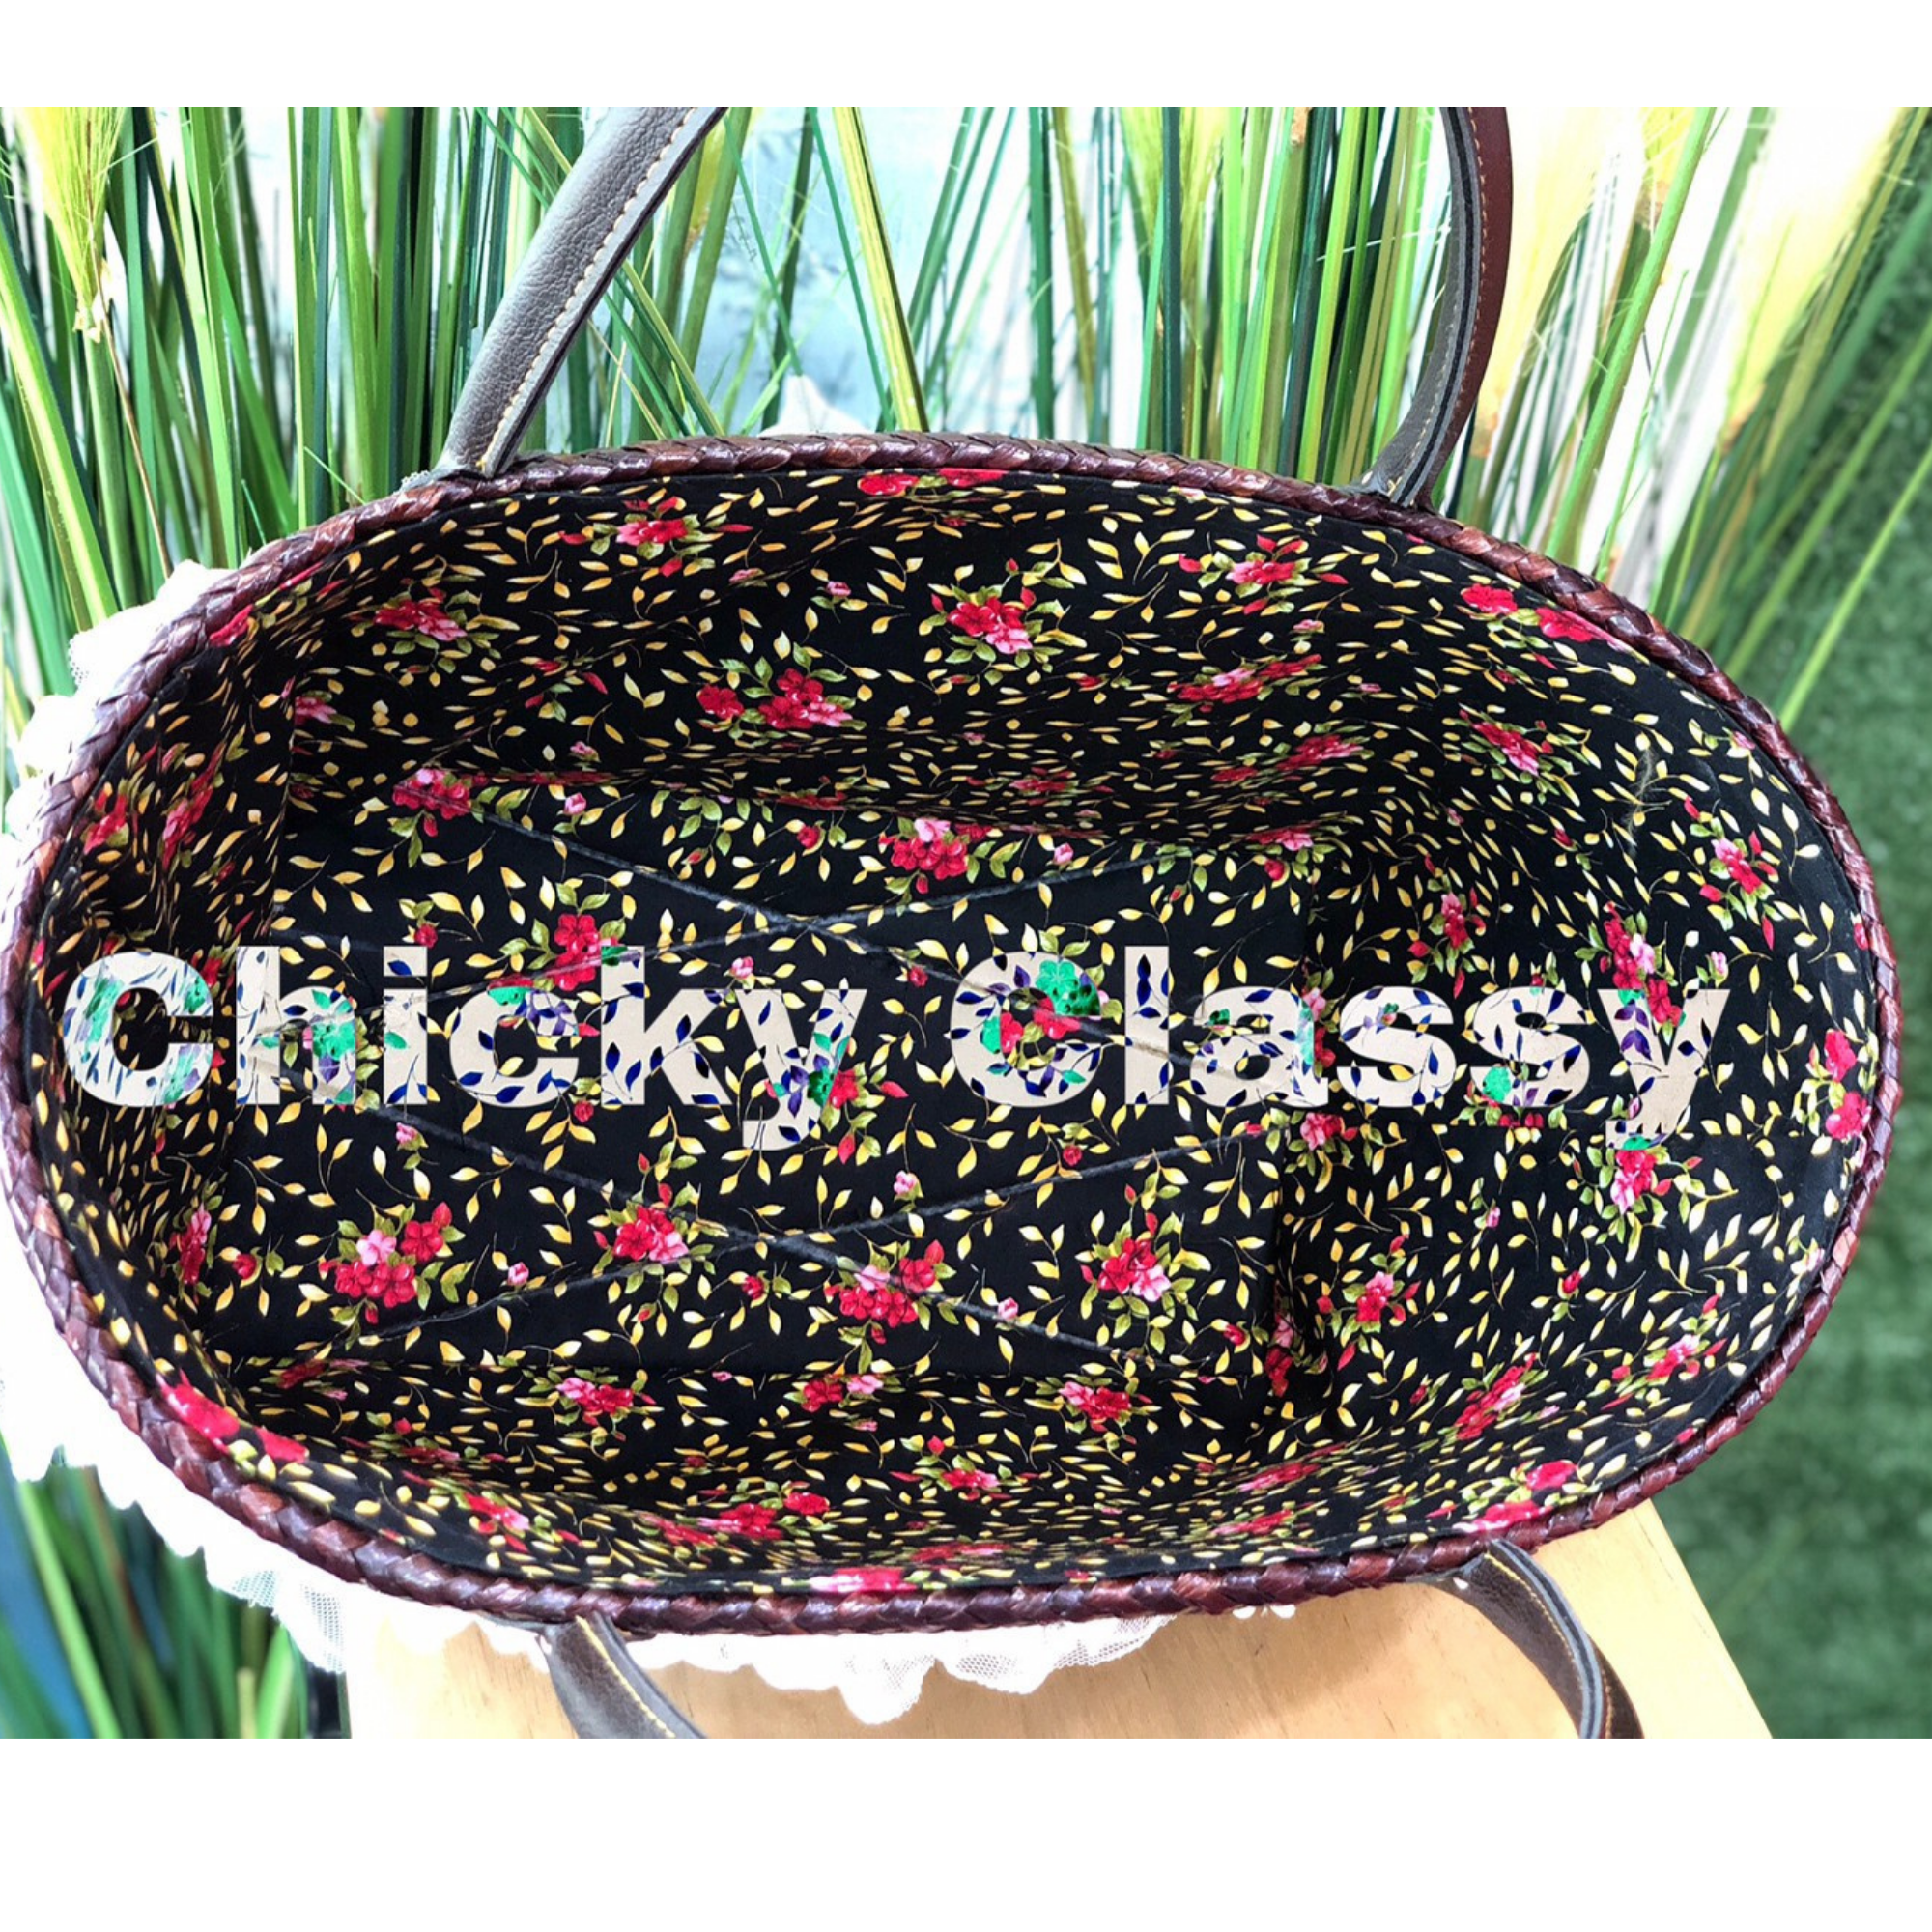 Chicky Classy homemade bags classic